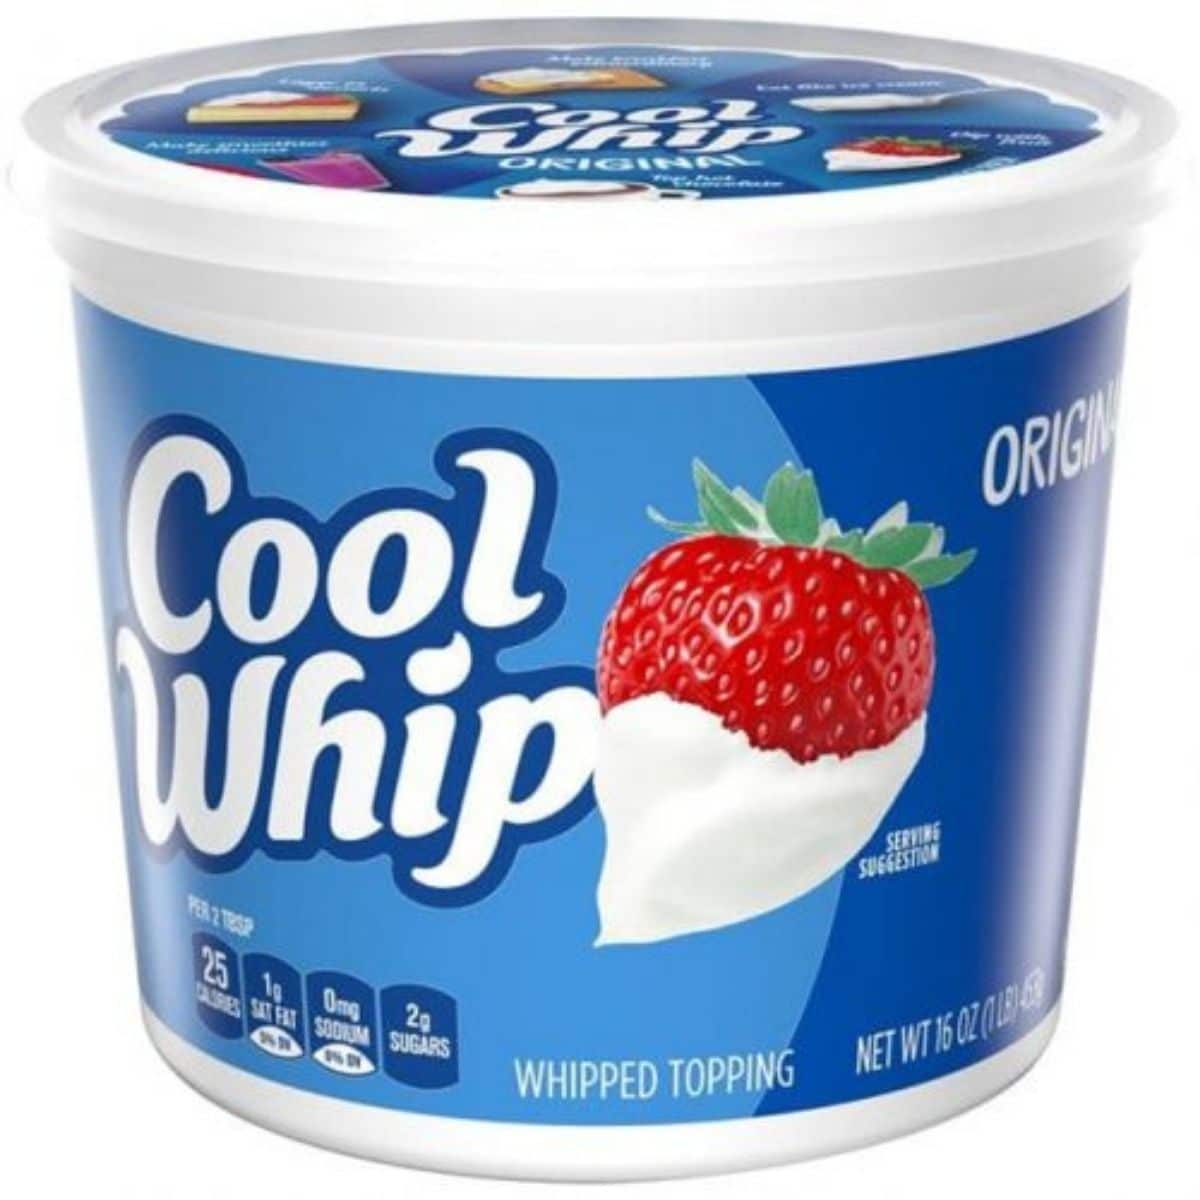 A big tub of cool whip.